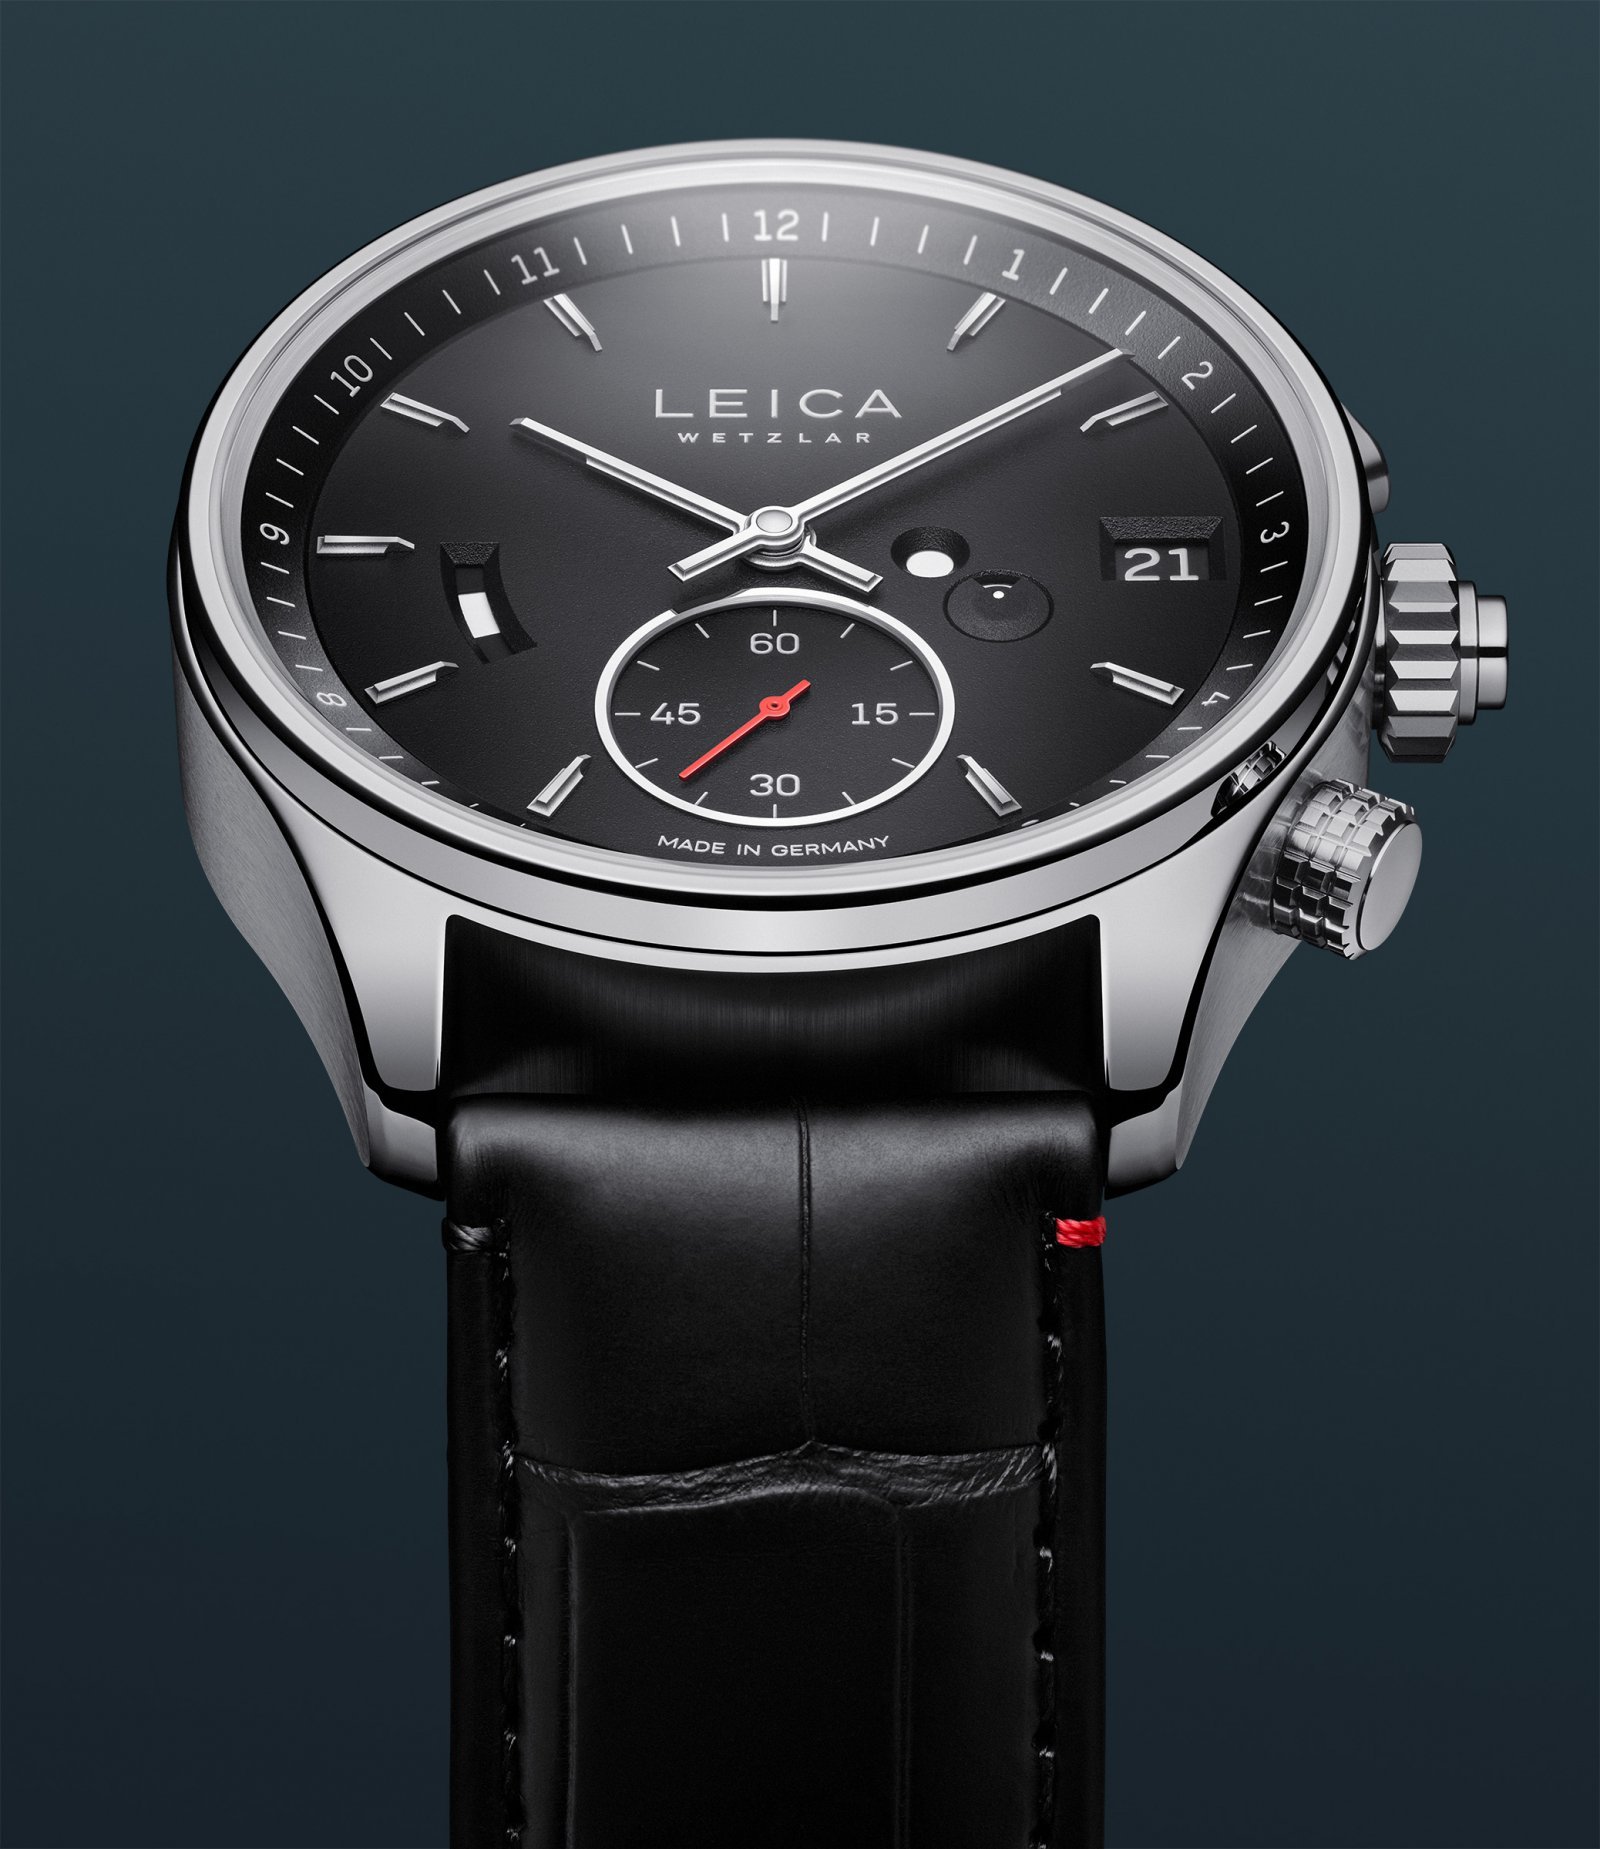 Leica_Watch_front-angle_LoRes_RGB.jpg